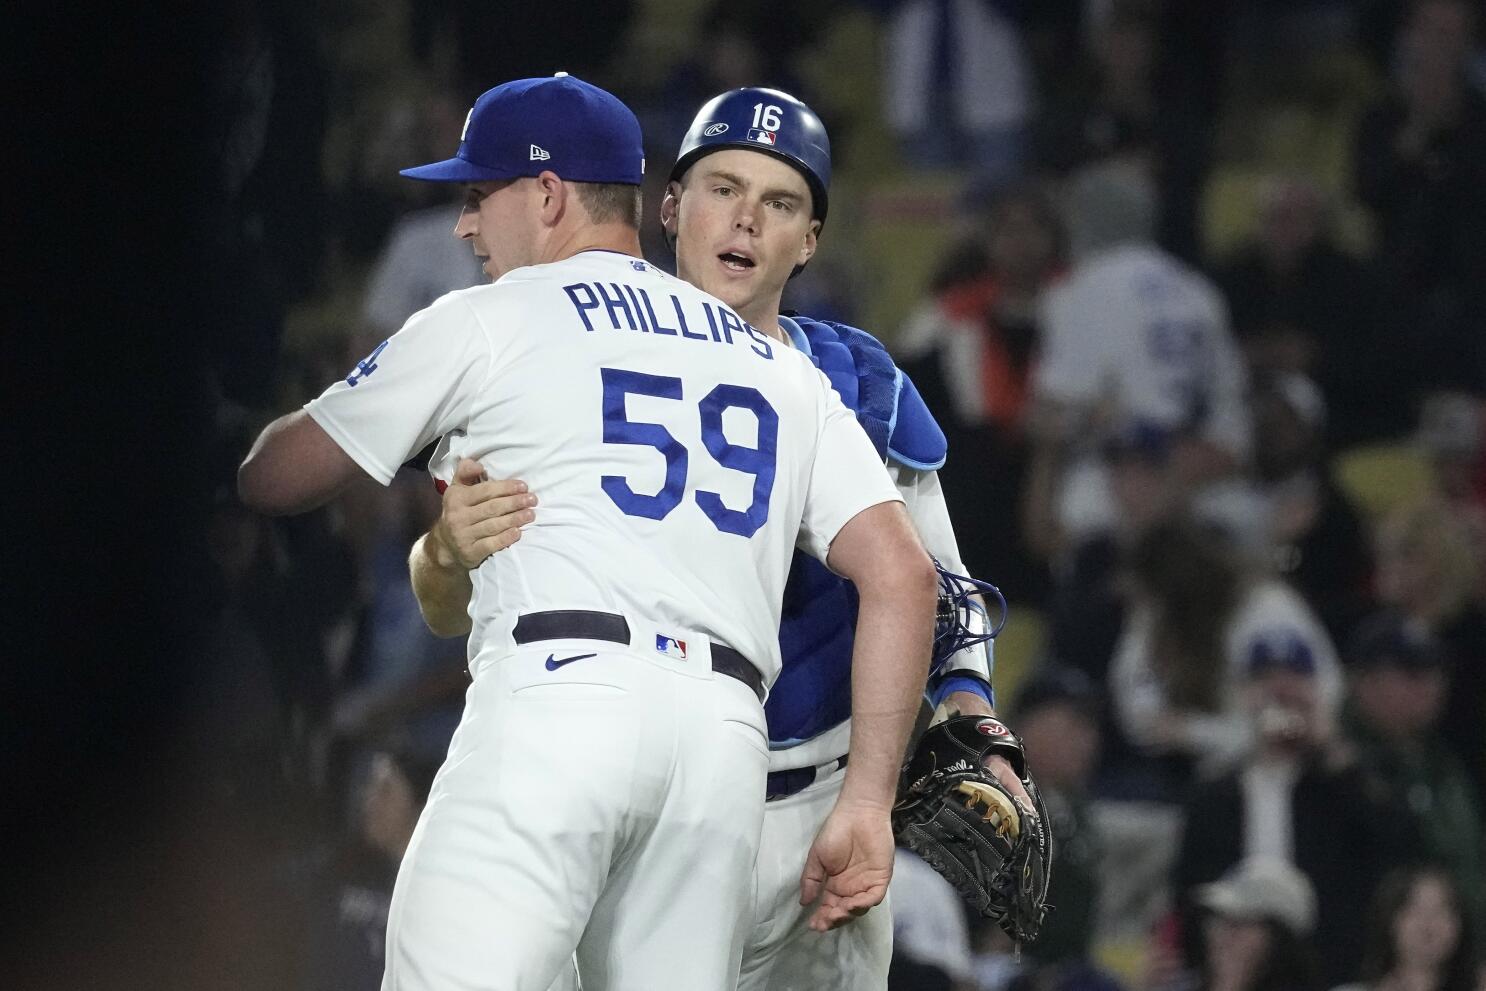 Dodgers capitalize on Giants' physical and mental blunders to win